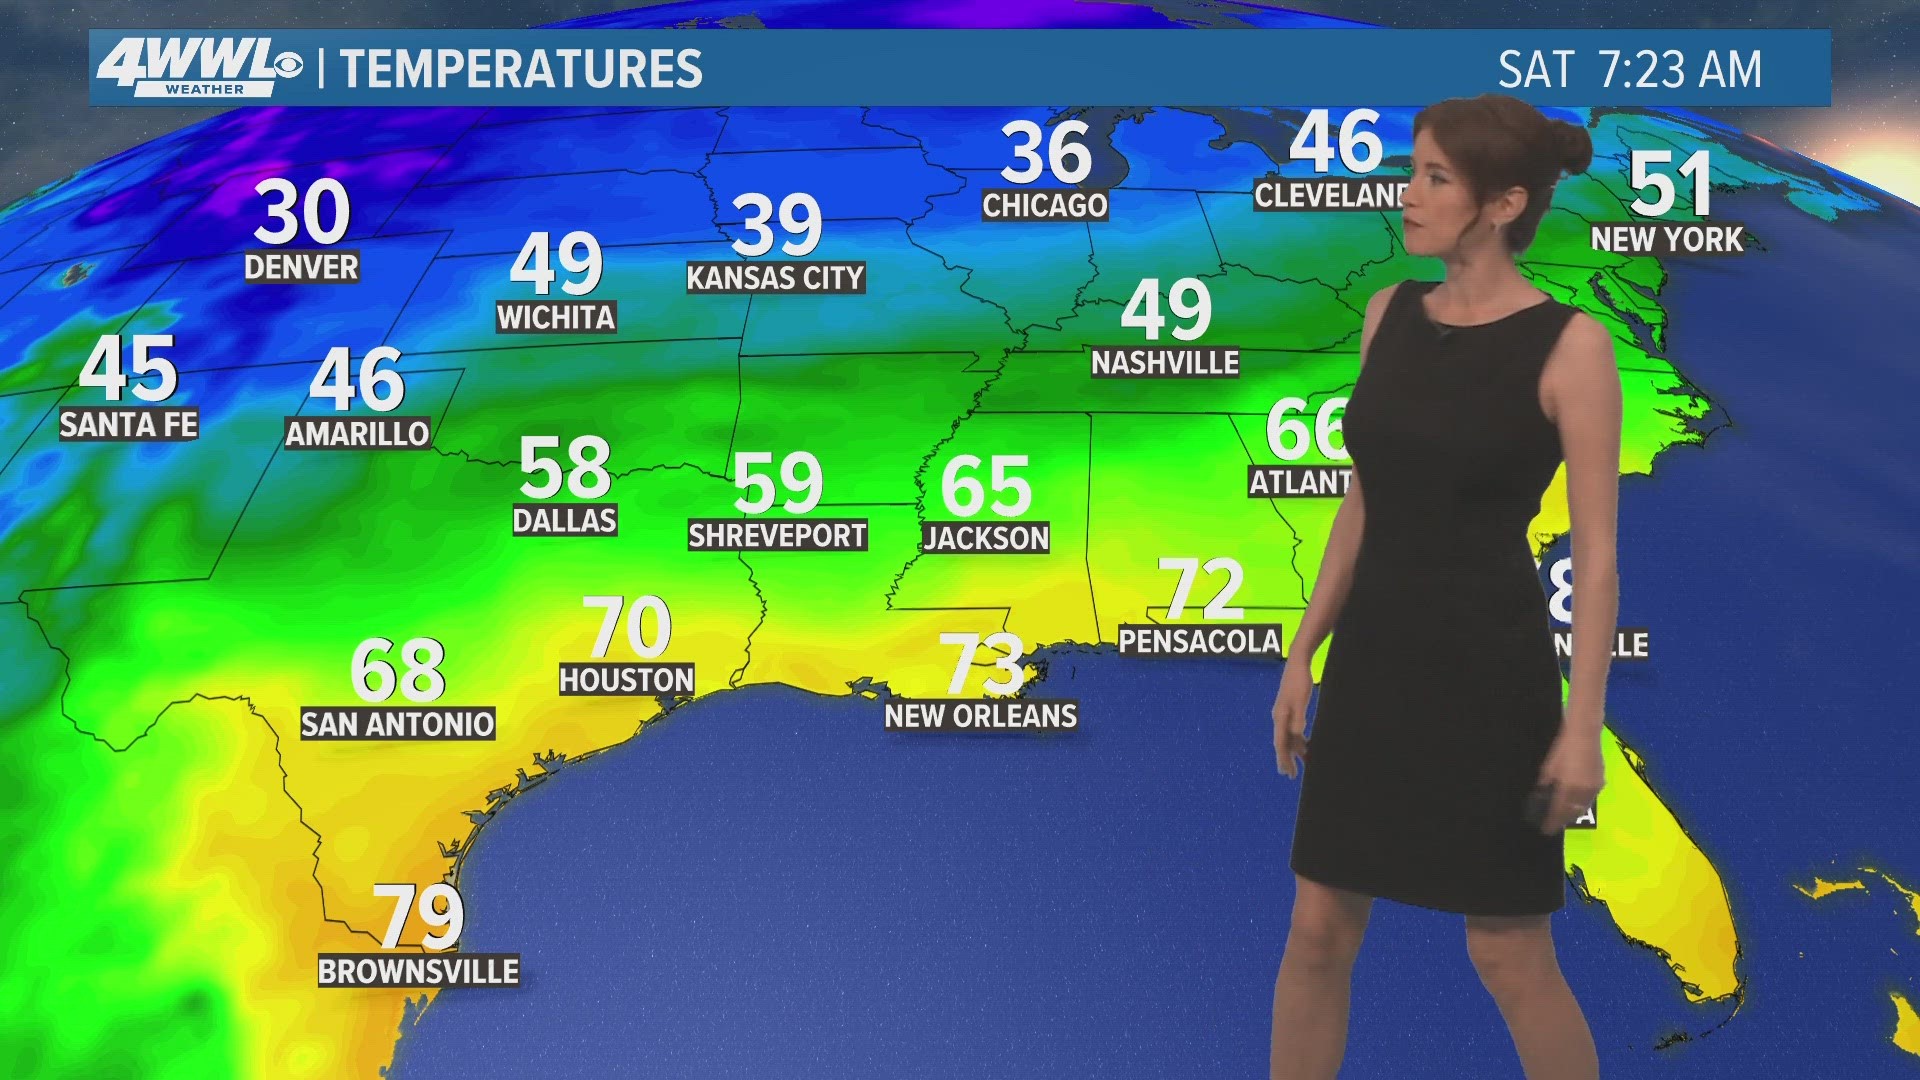 WWL Meteorologist Alexandra Cranford gives a full look at the Saturday forecast for Southeast Louisiana.